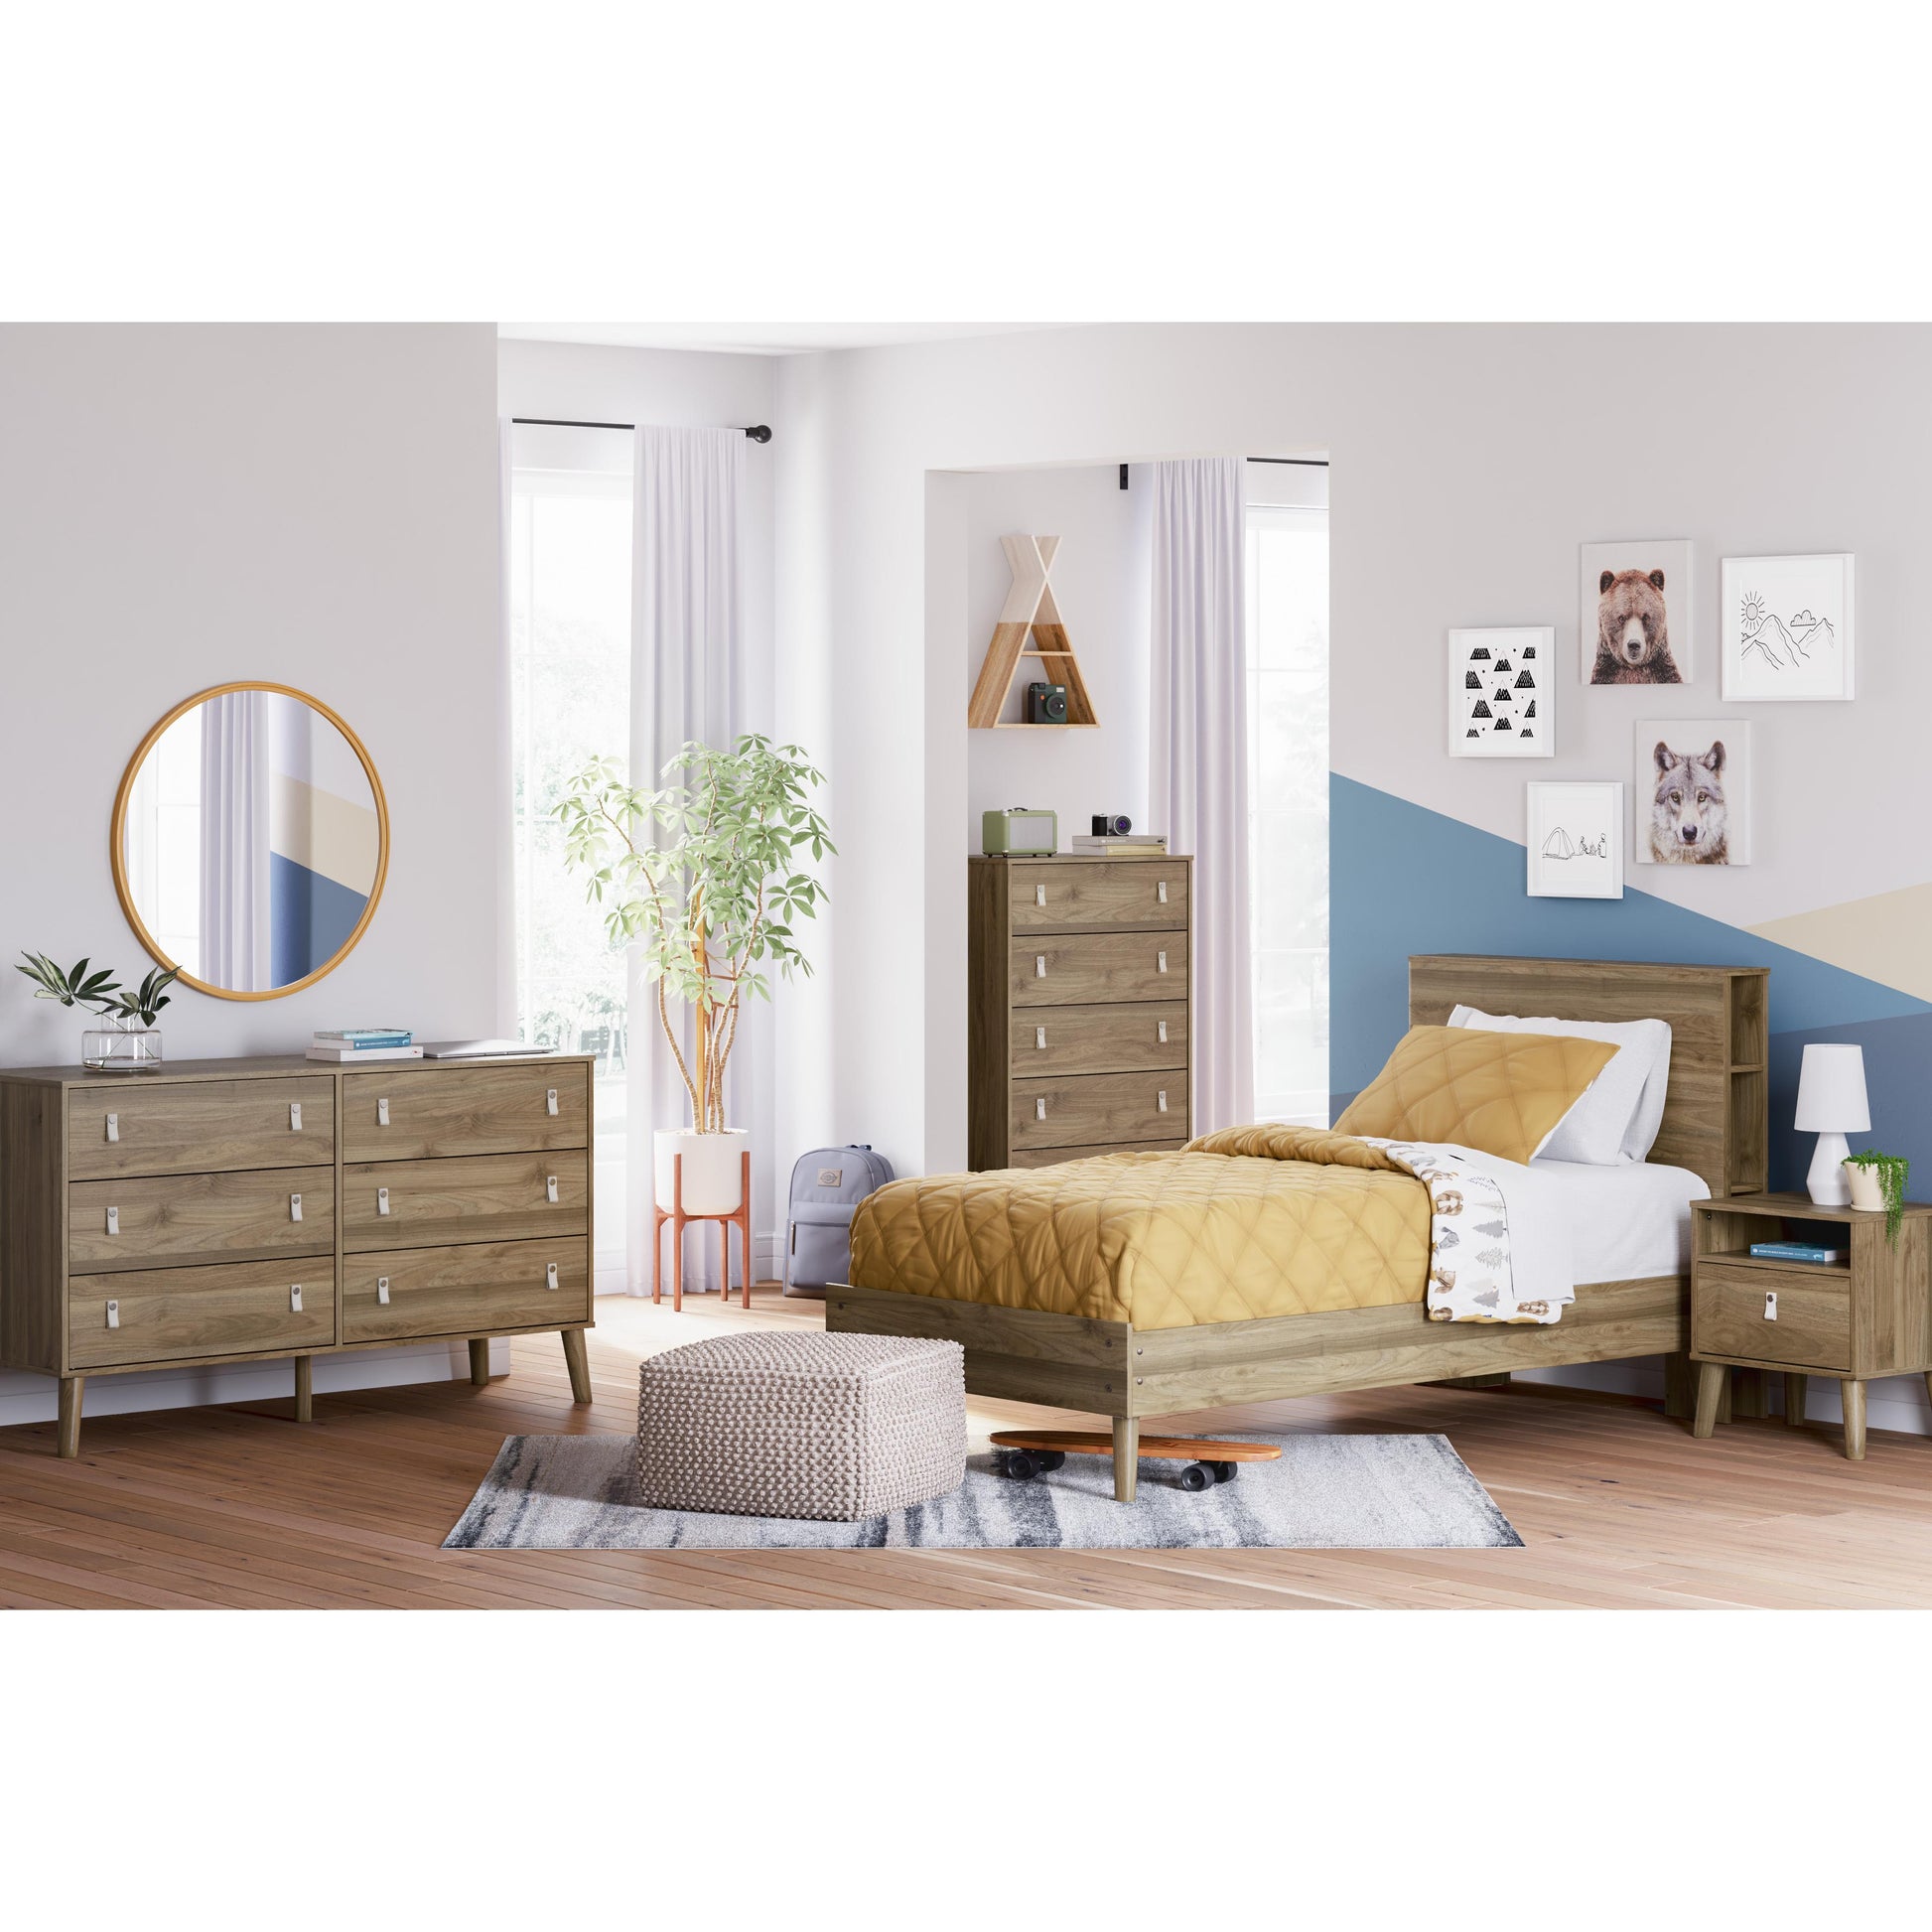 Signature Design by Ashley Kids Beds Bed EB1187-163/EB1187-111 IMAGE 7